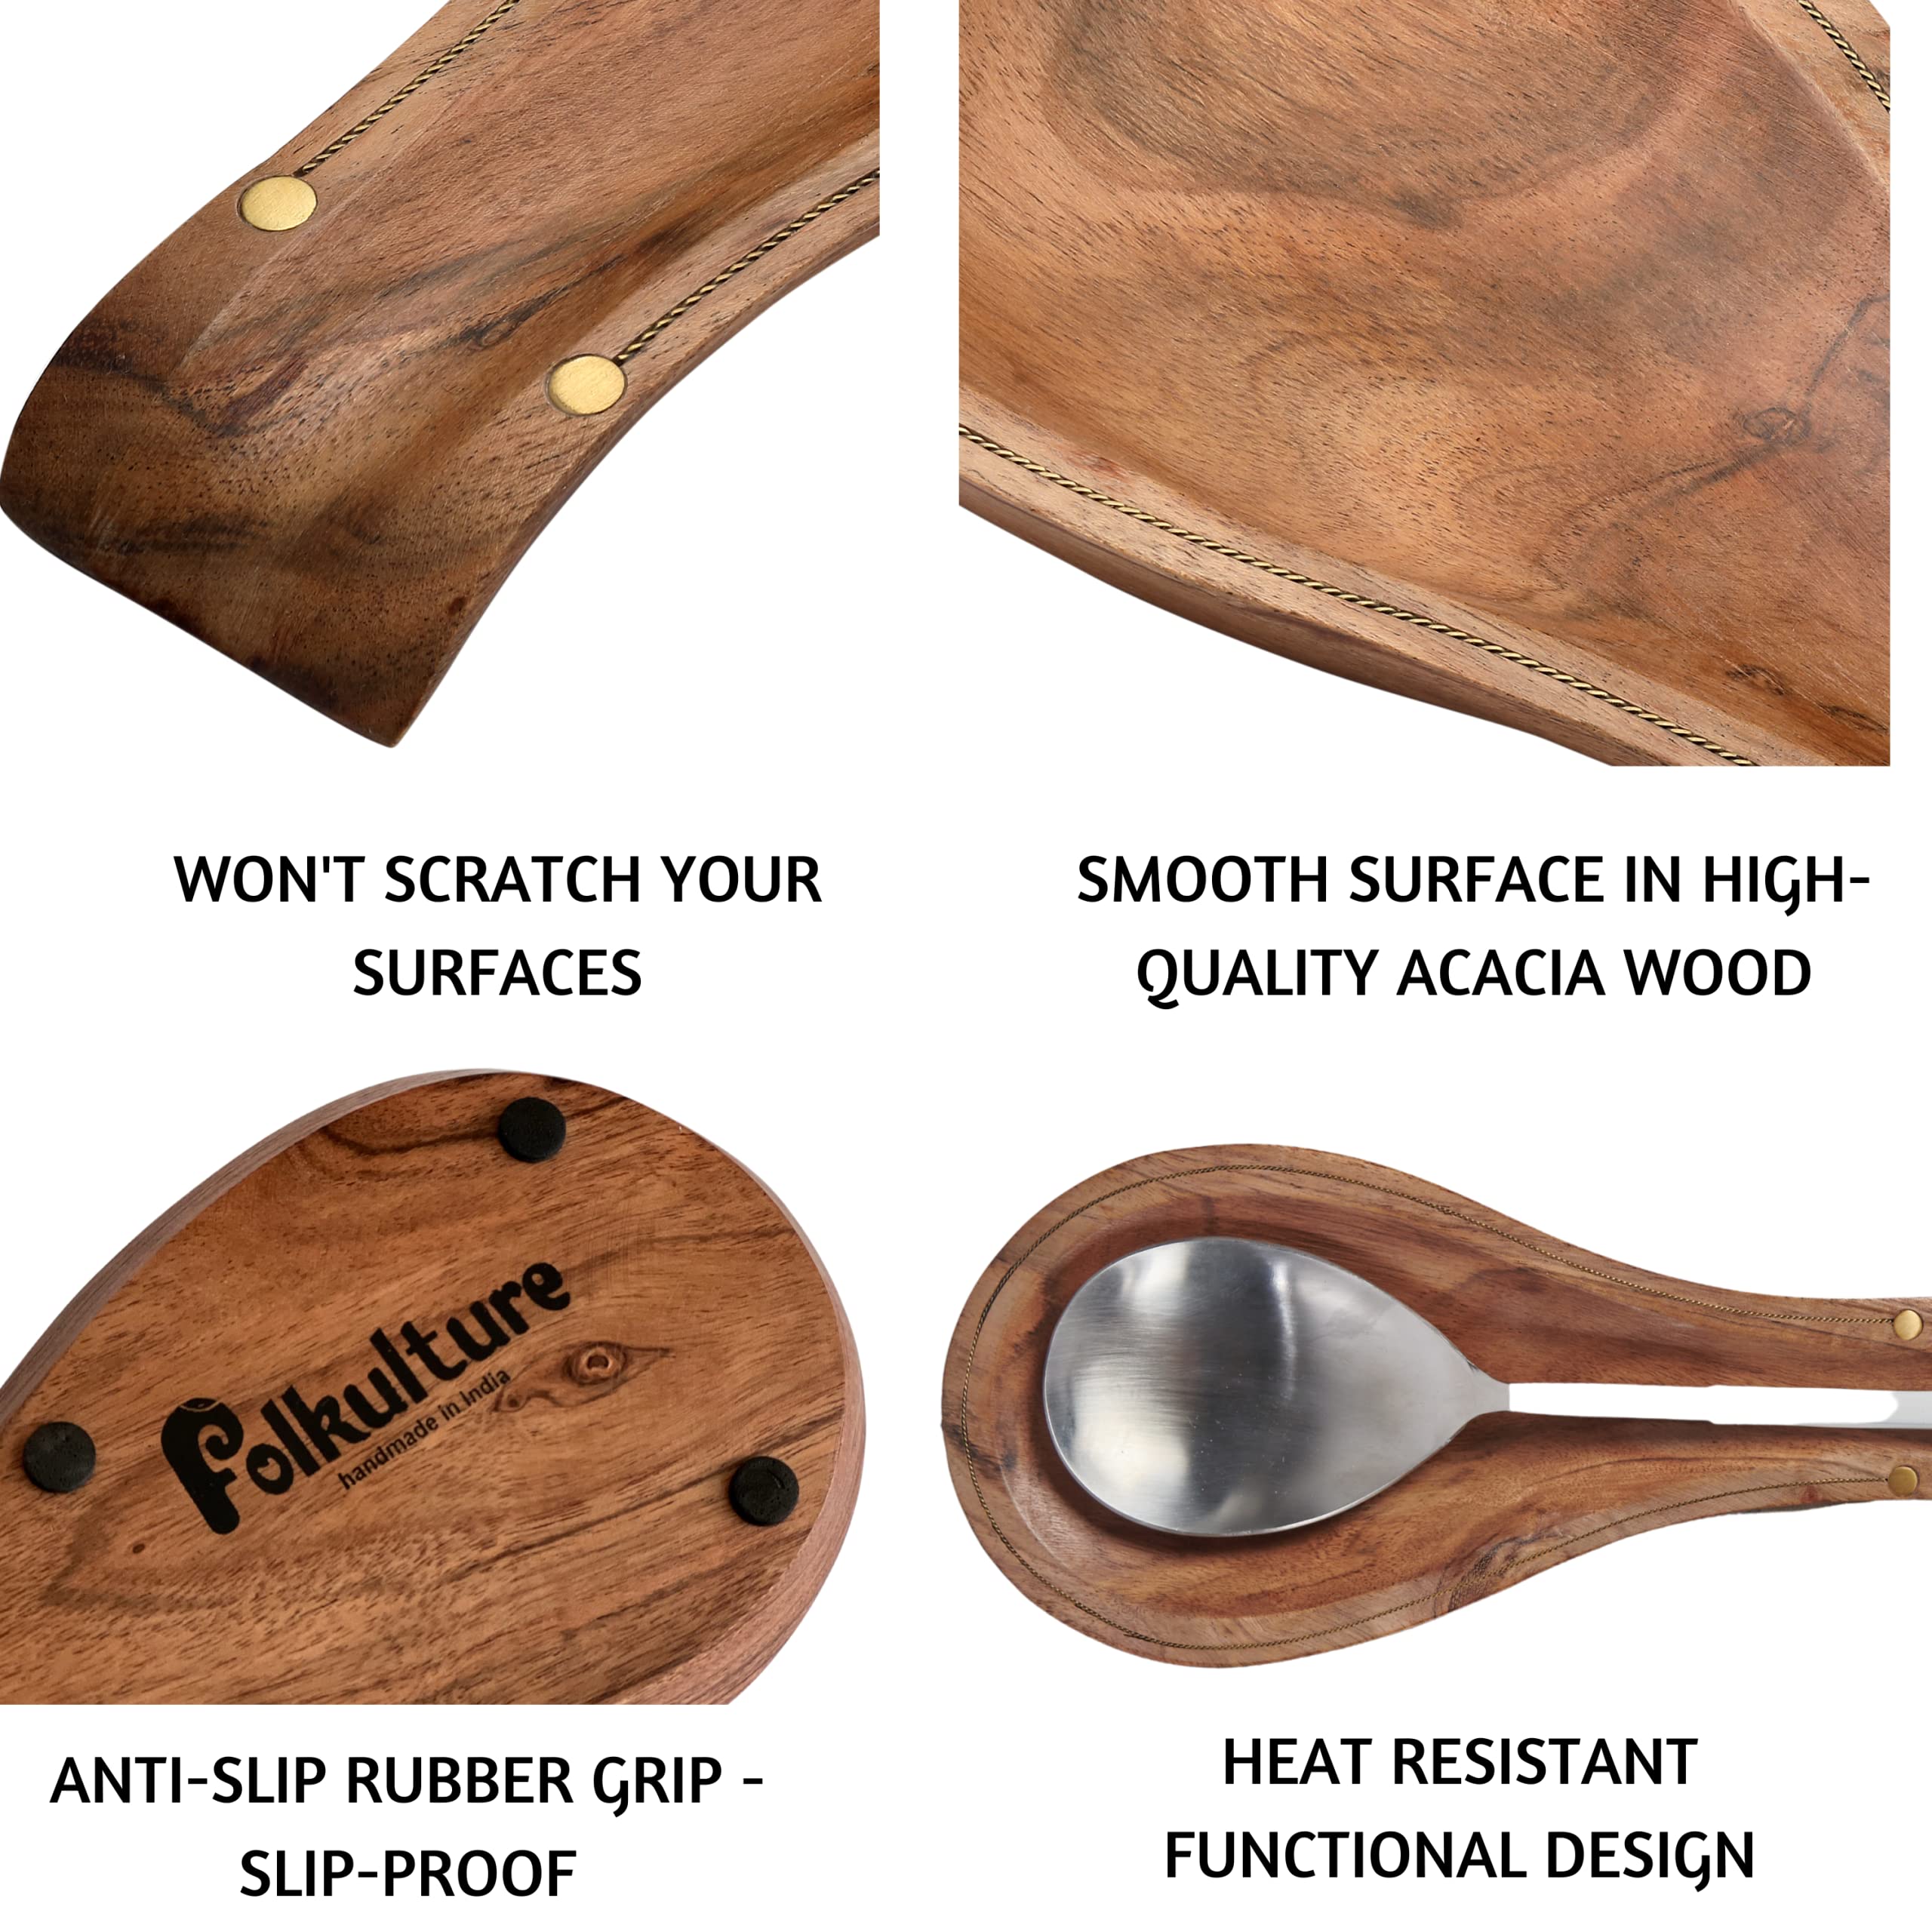 Folkulture Spoon Rest for Kitchen Counter, Spoon Holder for Stove Top or Countertop, Pot Holders for Kitchen, Hot Pads or Trivets for Hot Dishes Pots and Pans